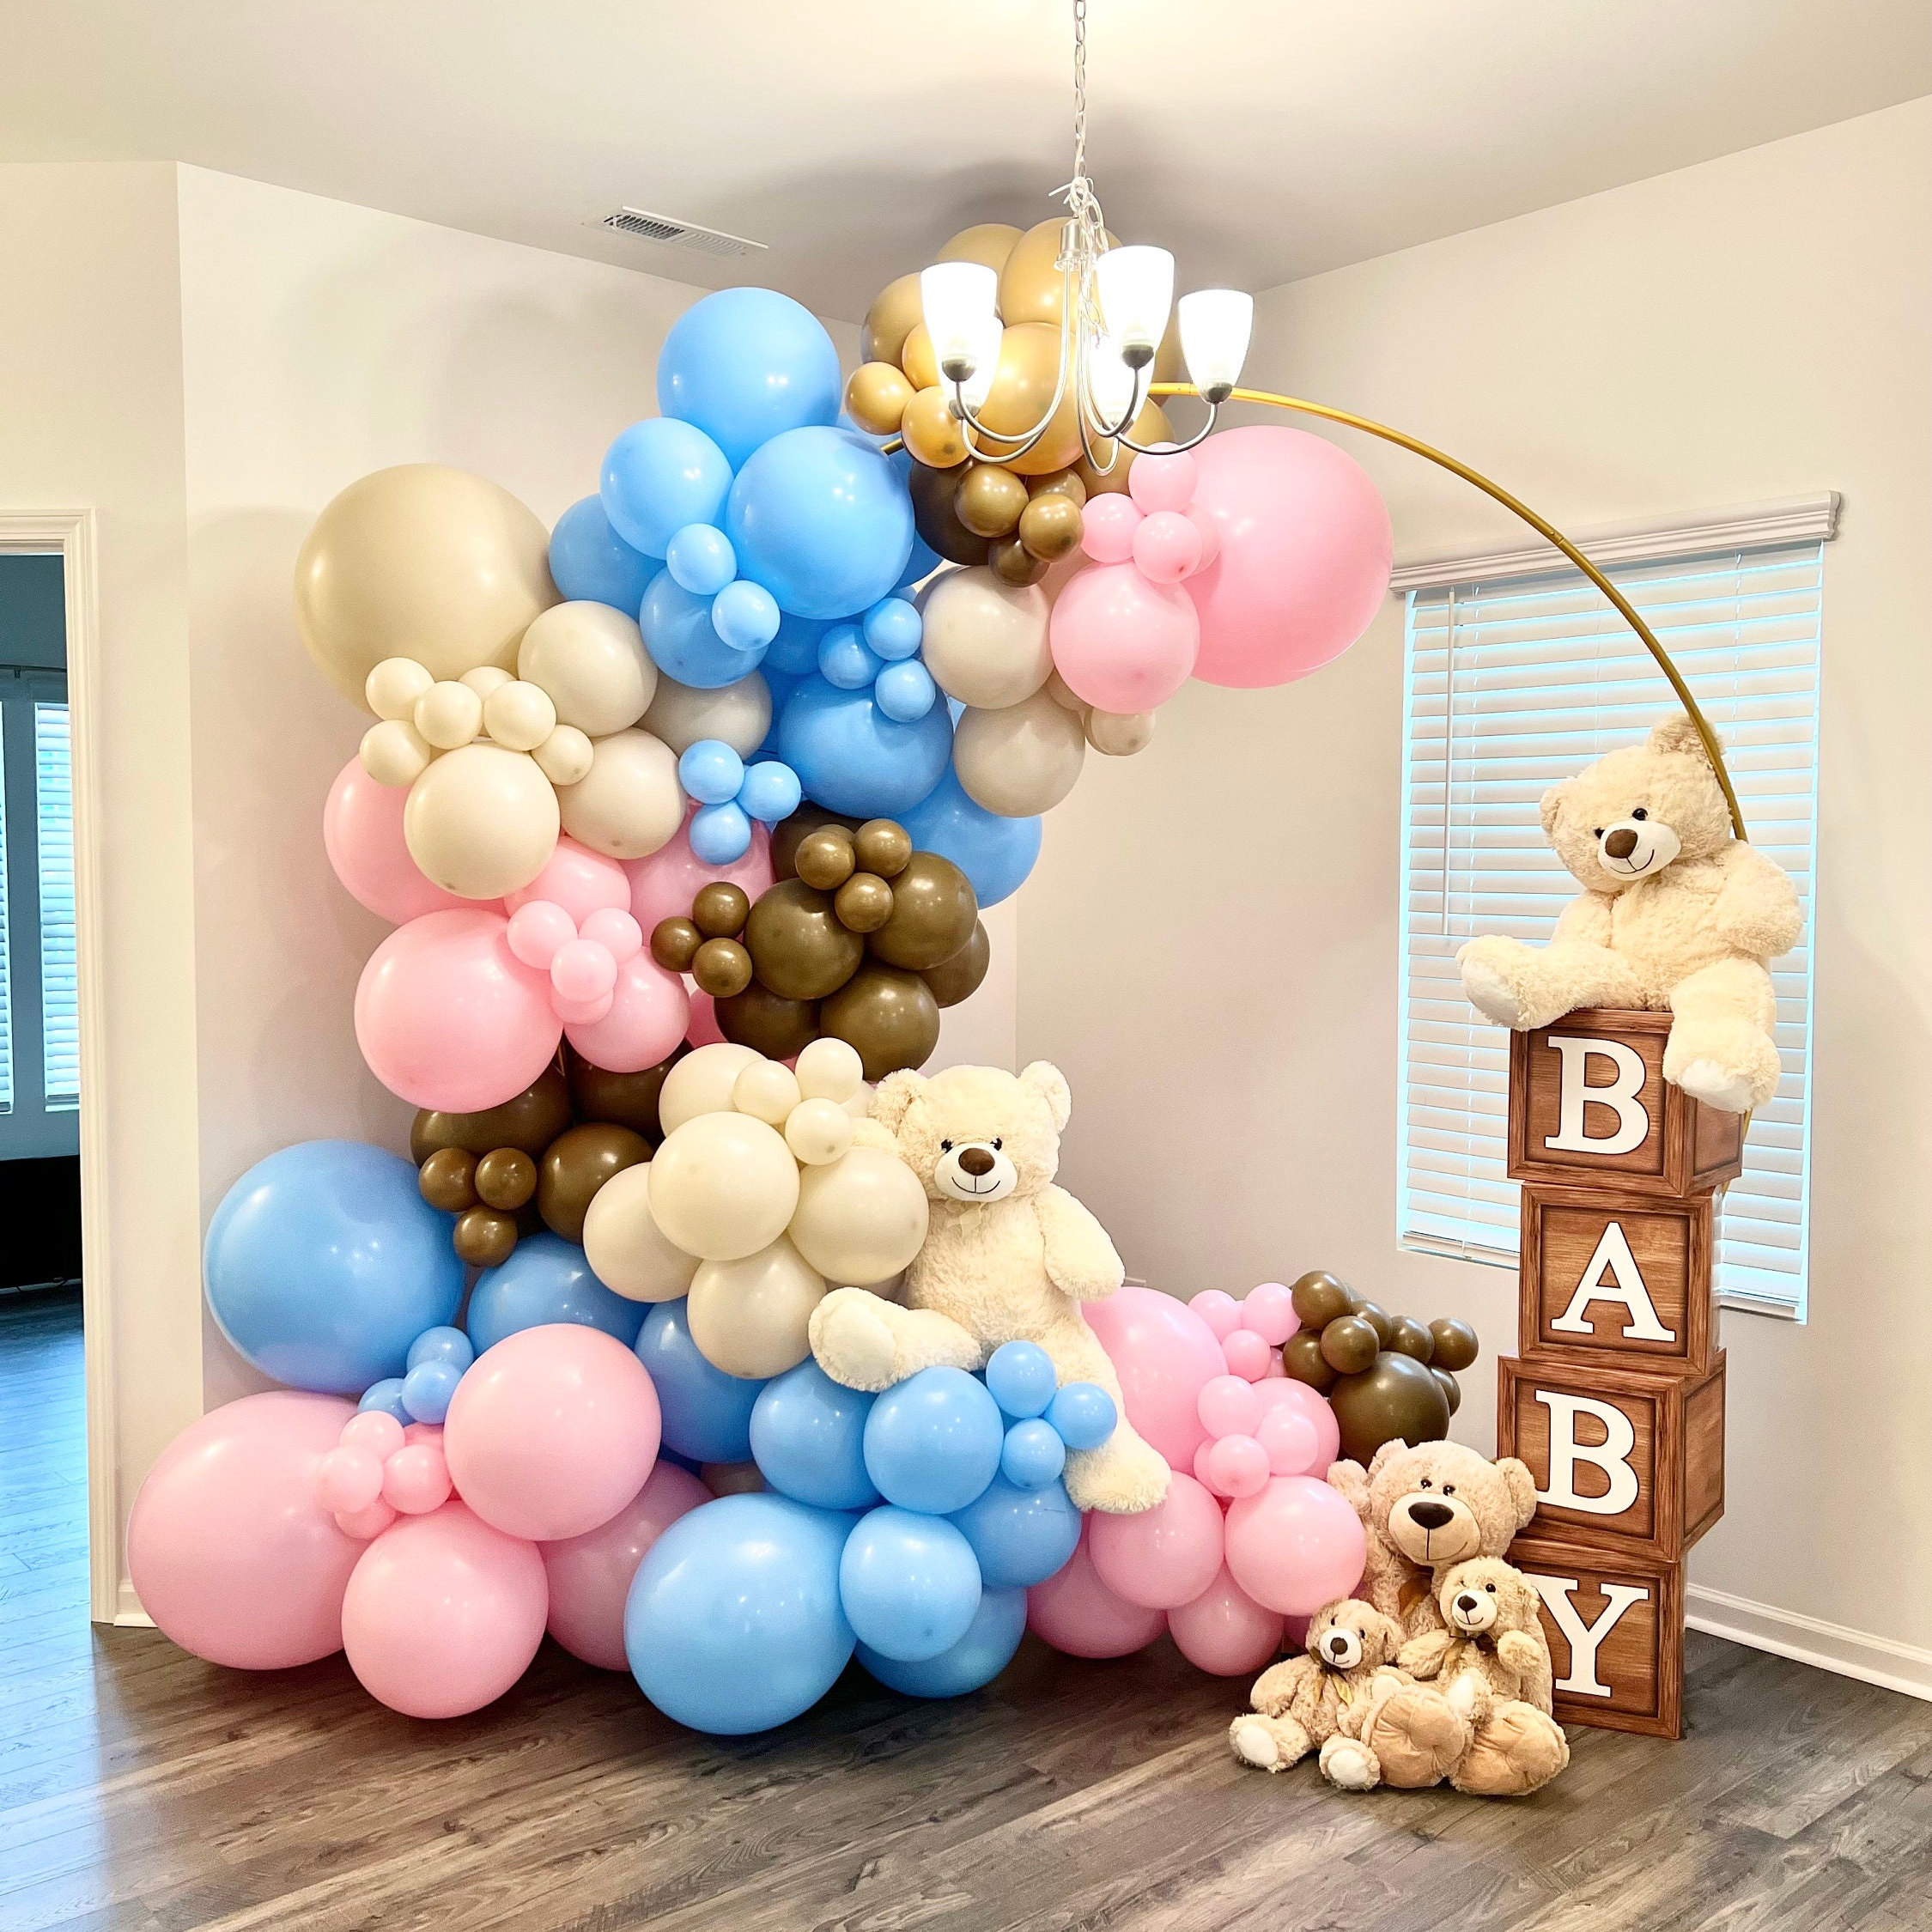 GENDER REVEAL PARTY DIYS  Decorations & Food With Easy DIY Balloon Garland  